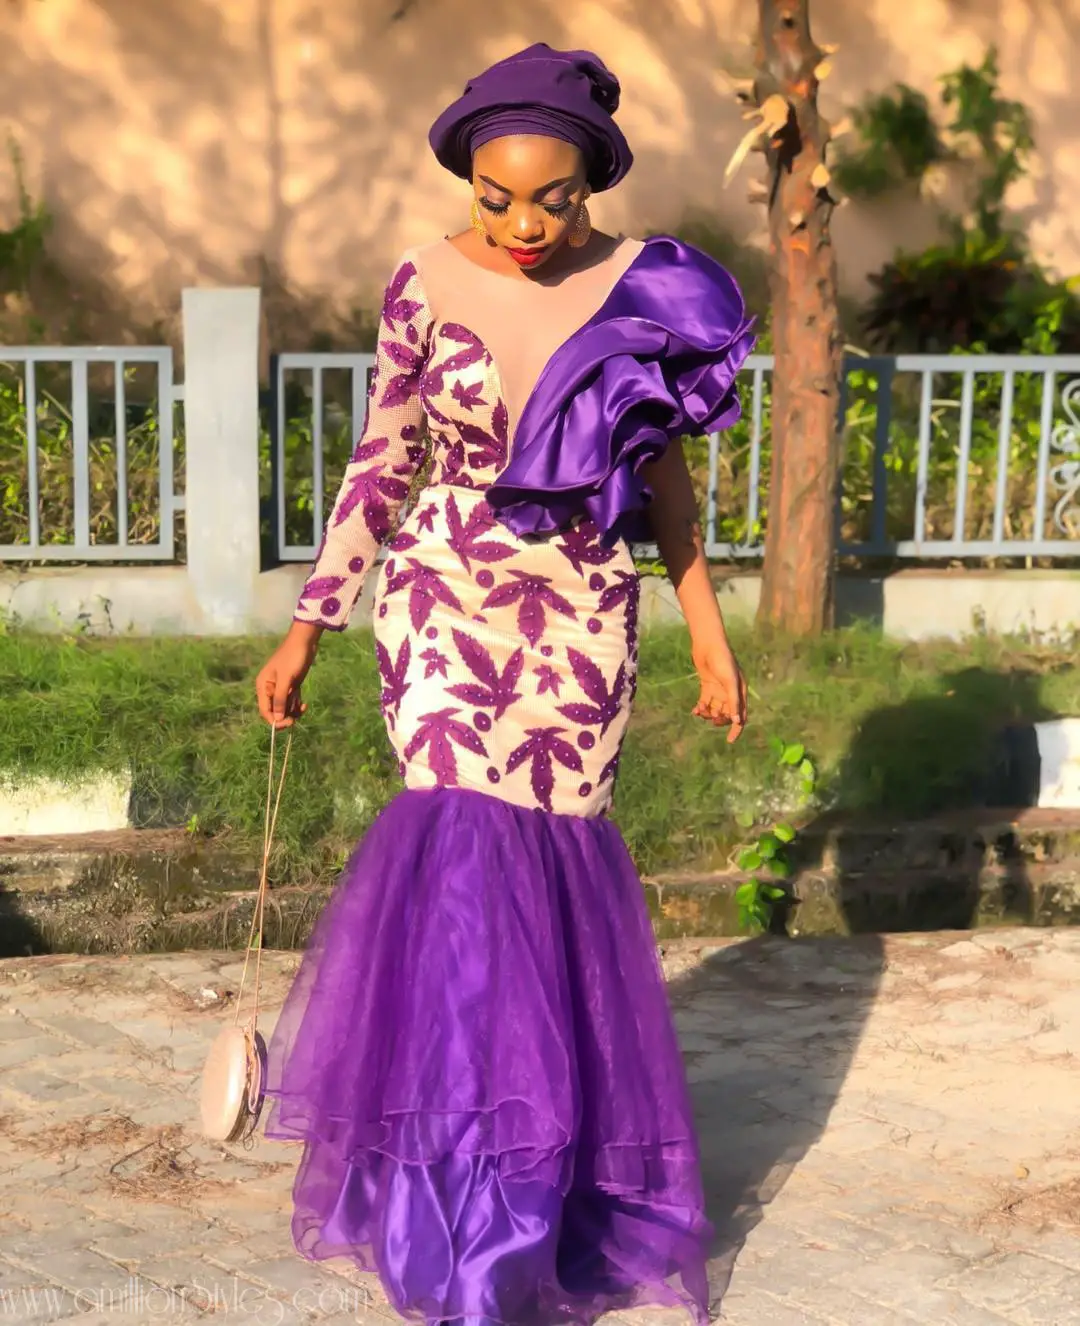 Lace Asoebi Styles Are Winners, Anyday!